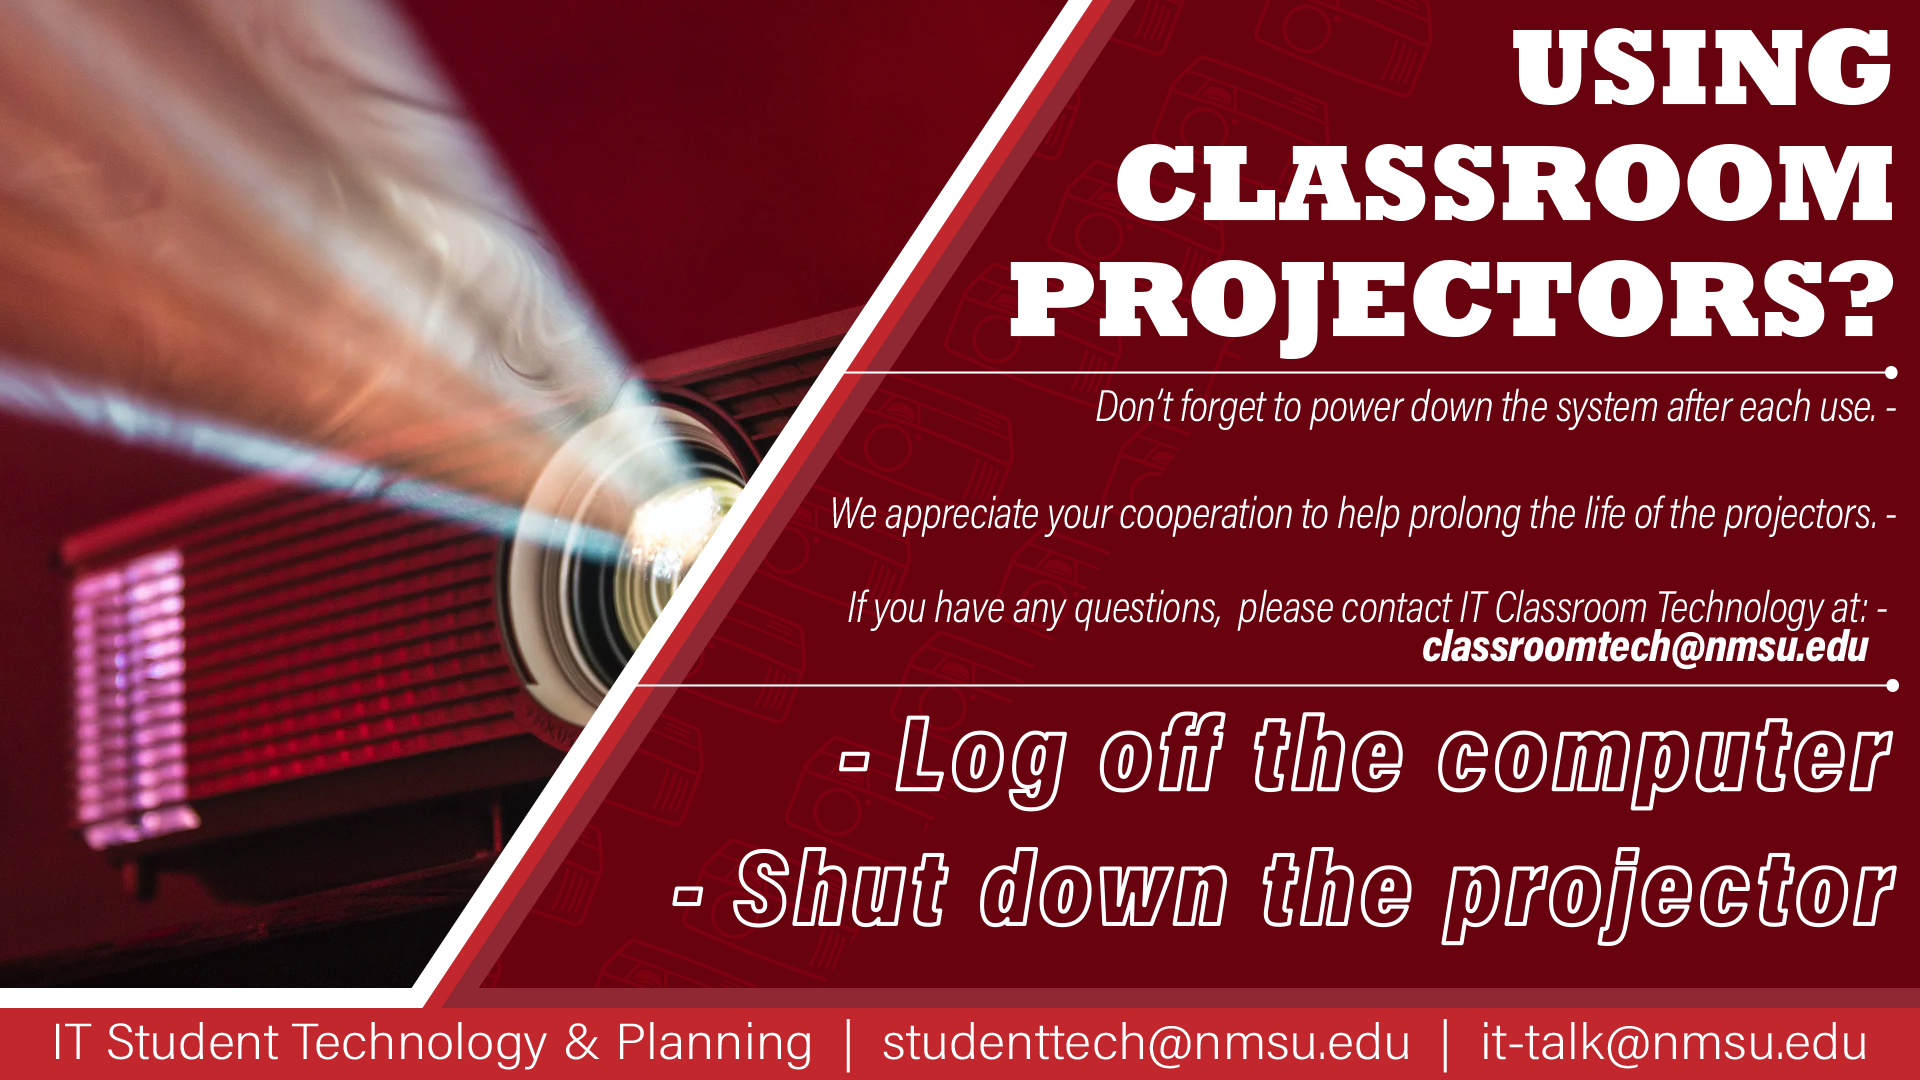 Using classroom projectors? Don't forget to power down the system after each use. For questions, contact IT Classroom Technology at classroomtech@nmsu.edu